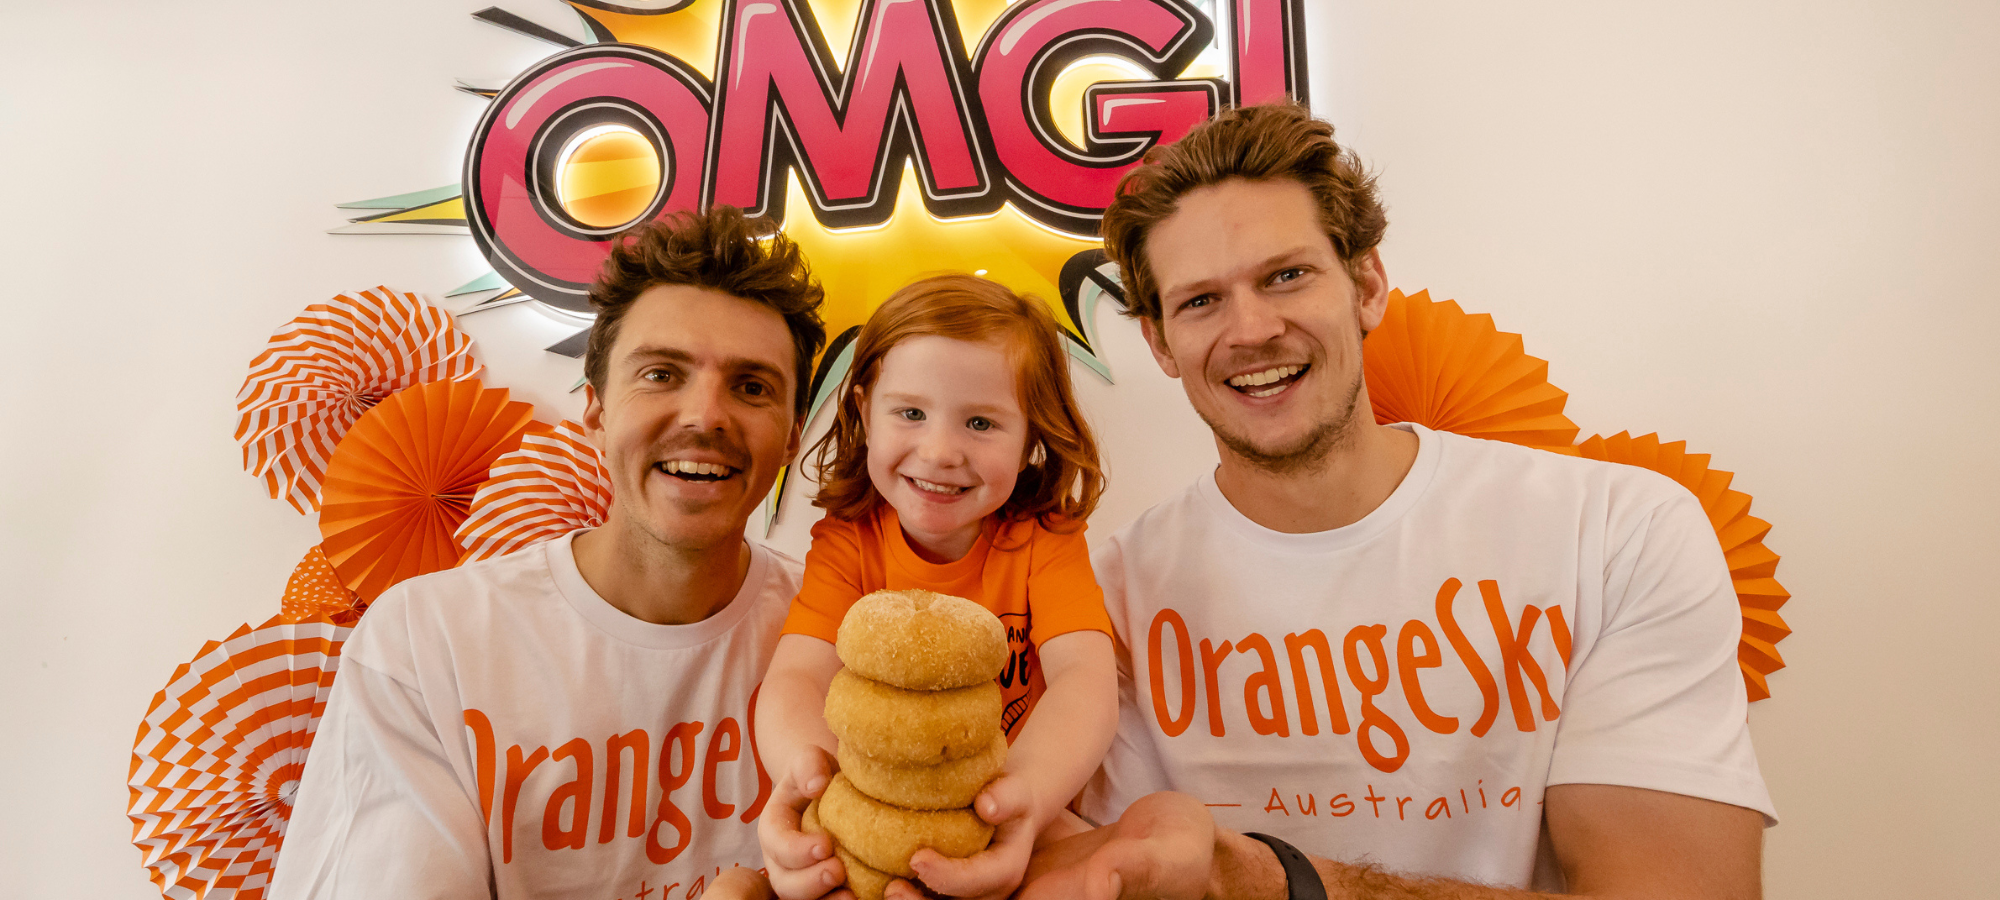 OMG! Decadent Donuts turns orange to raise funds for Orange Sky on World Donut Day